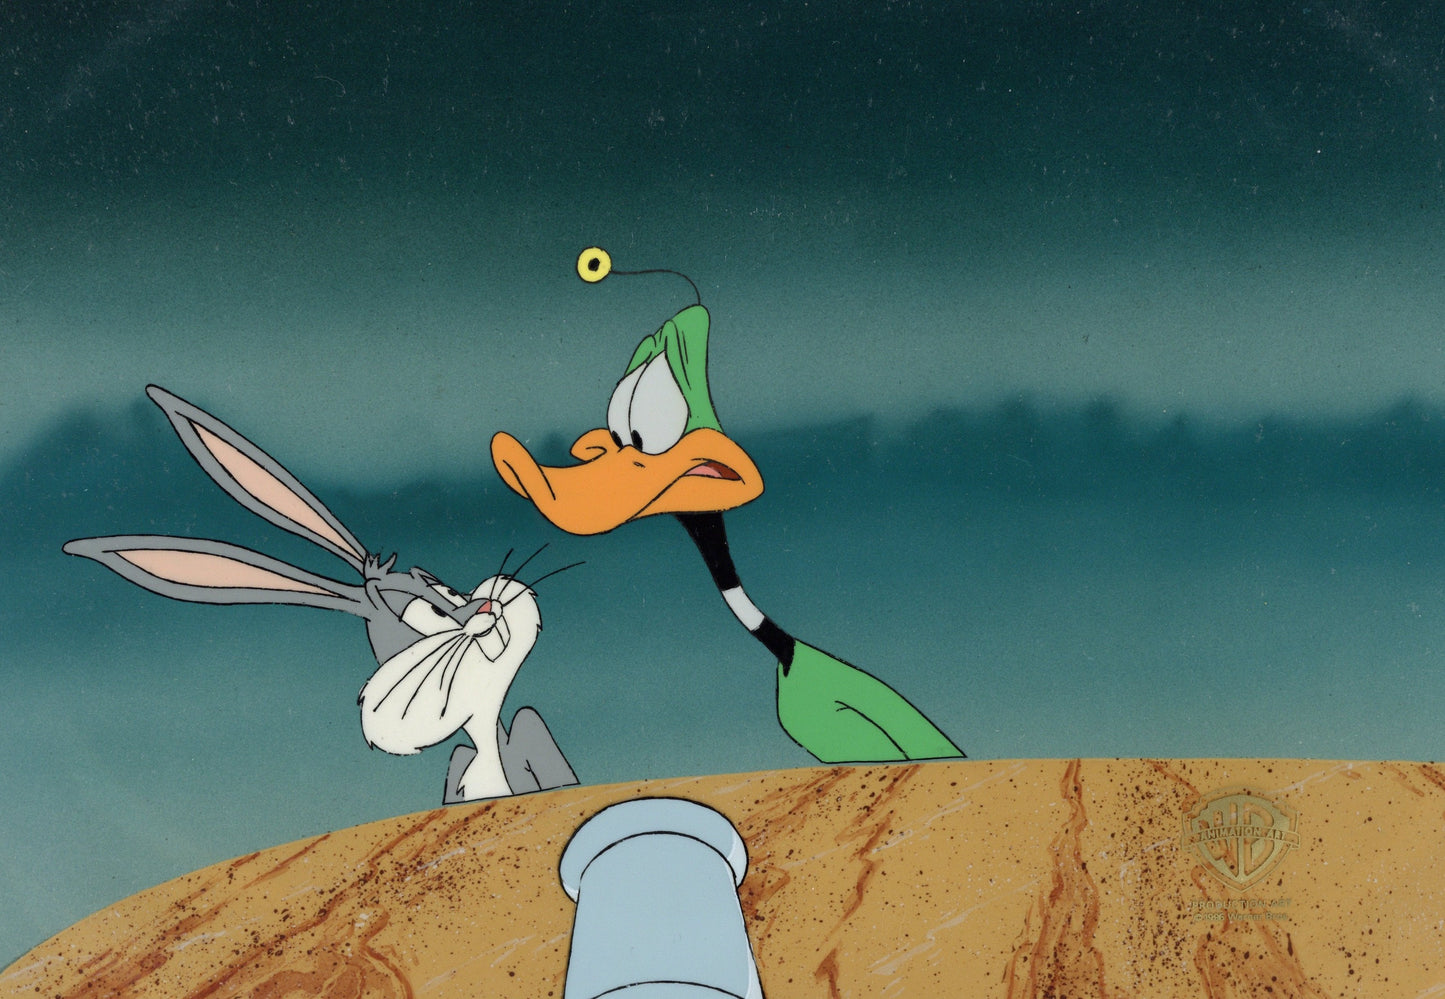 Looney Tunes Original Production Cel: Bugs Bunny and Duck Dodgers